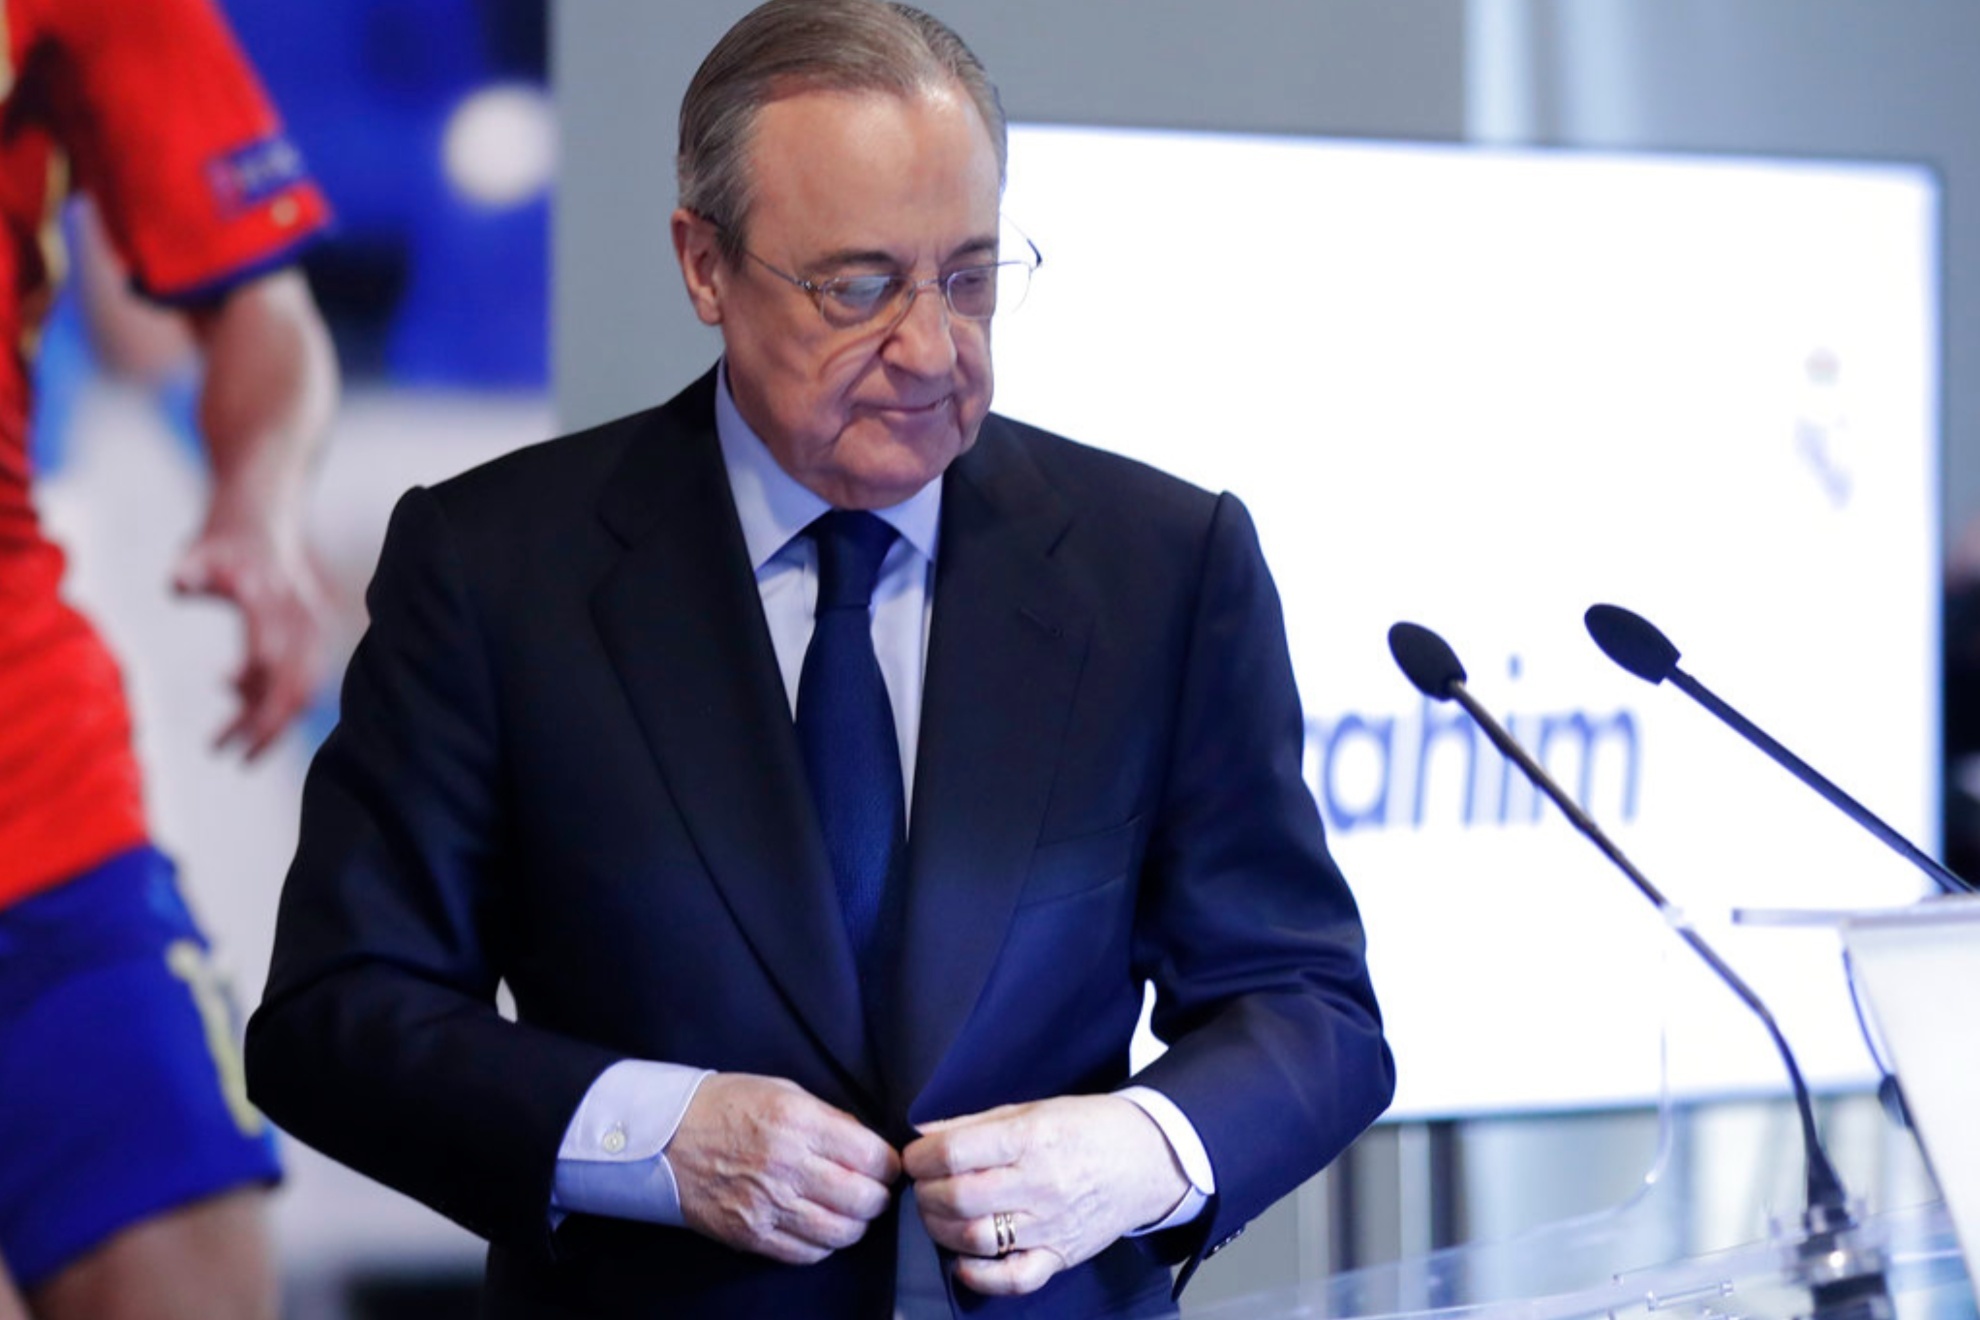 Real Madrid president Florentino Perez won't be in Barcelona for this Saturday's El Clasico